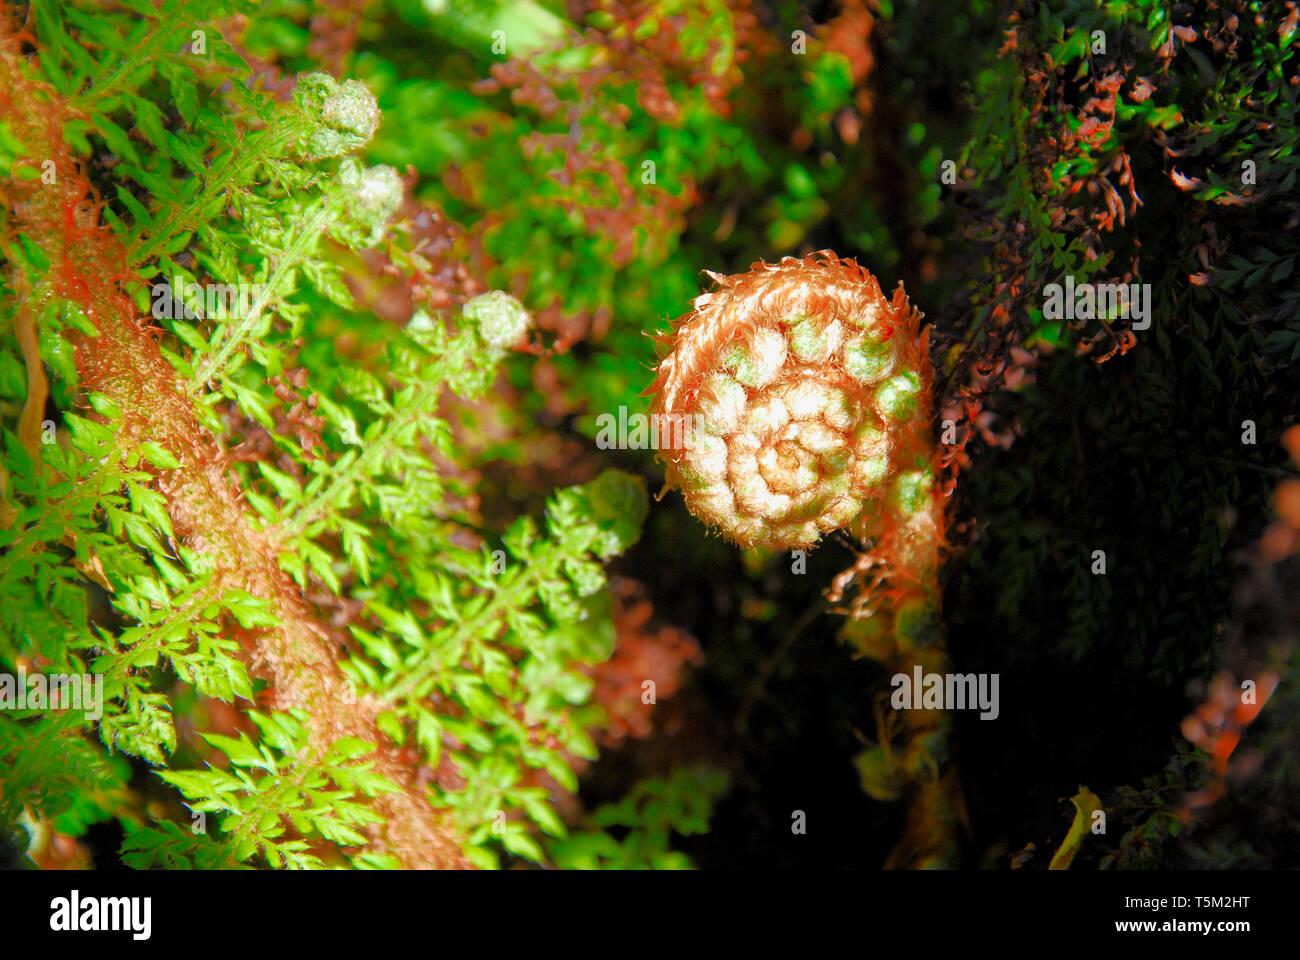 Portland, Dorset. 25th April 2019. A fiddlebank fern prepares to unfurl in the Portland sunshine, ahead of expected storm 'Hannah' on Friday. Credit: stuart fretwell/Alamy Live News Stock Photo